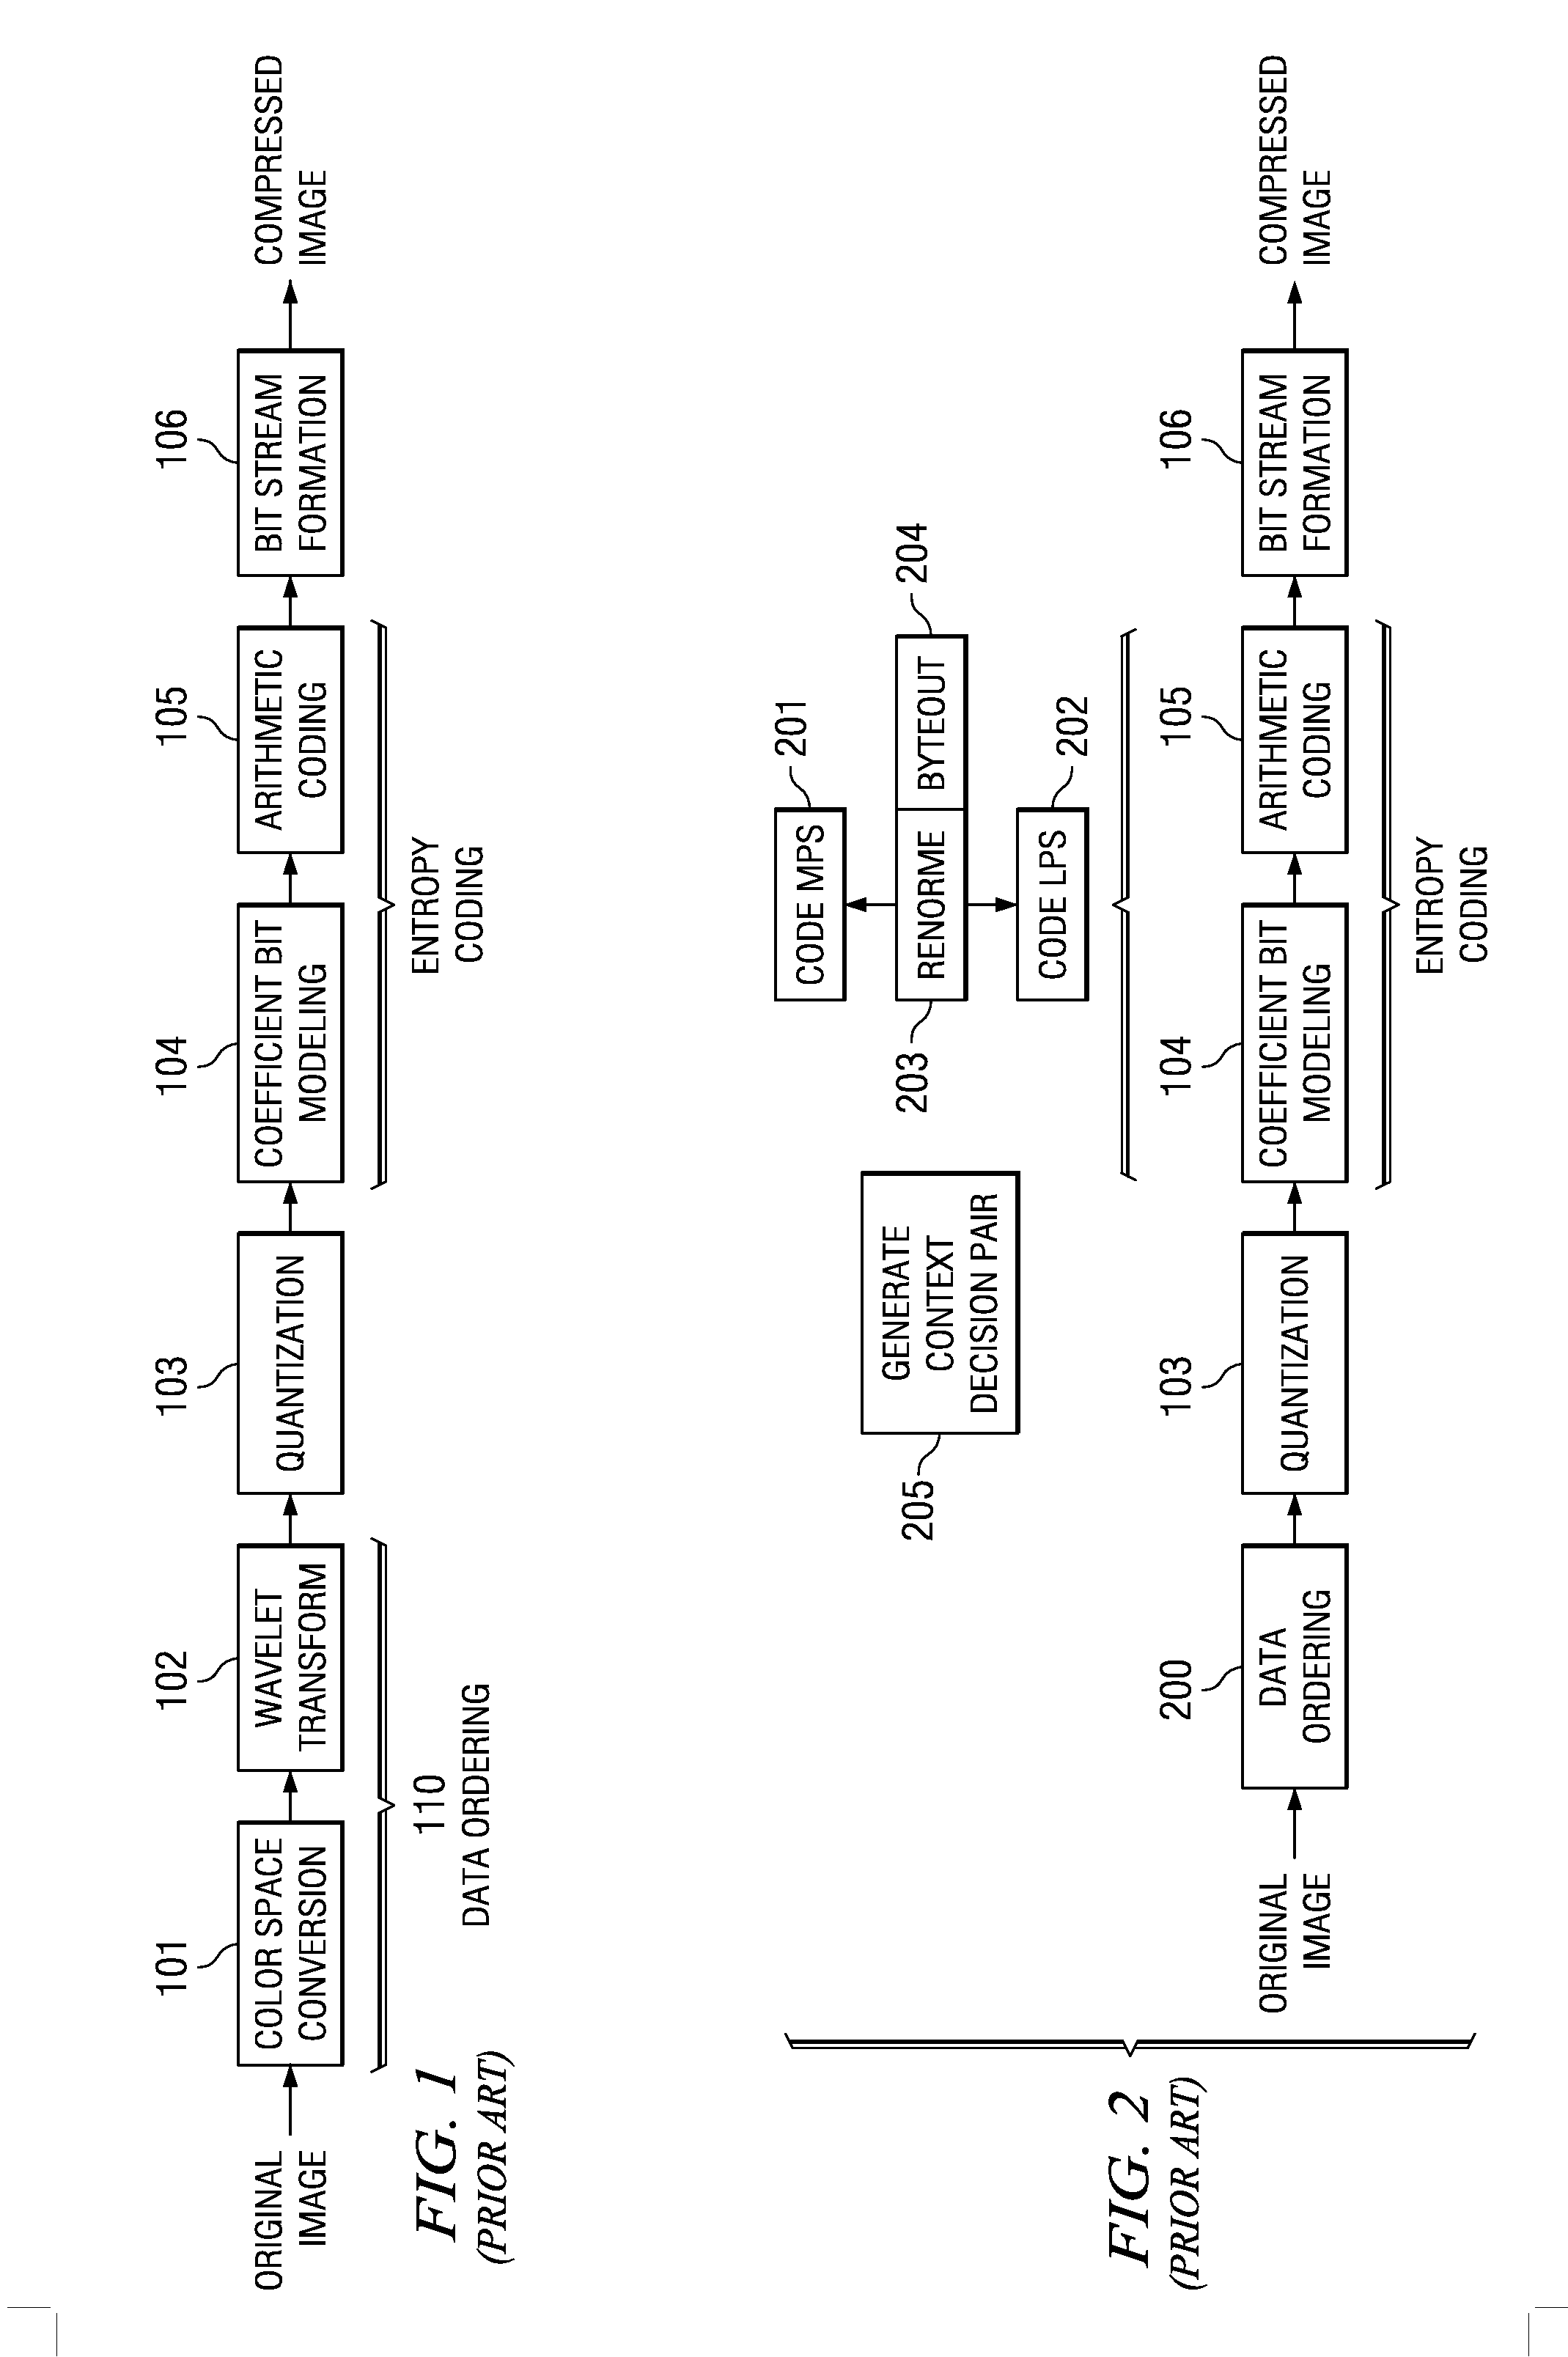 Method for Optimizing Software Implementations of the JPEG2000 Binary Arithmetic Encoder